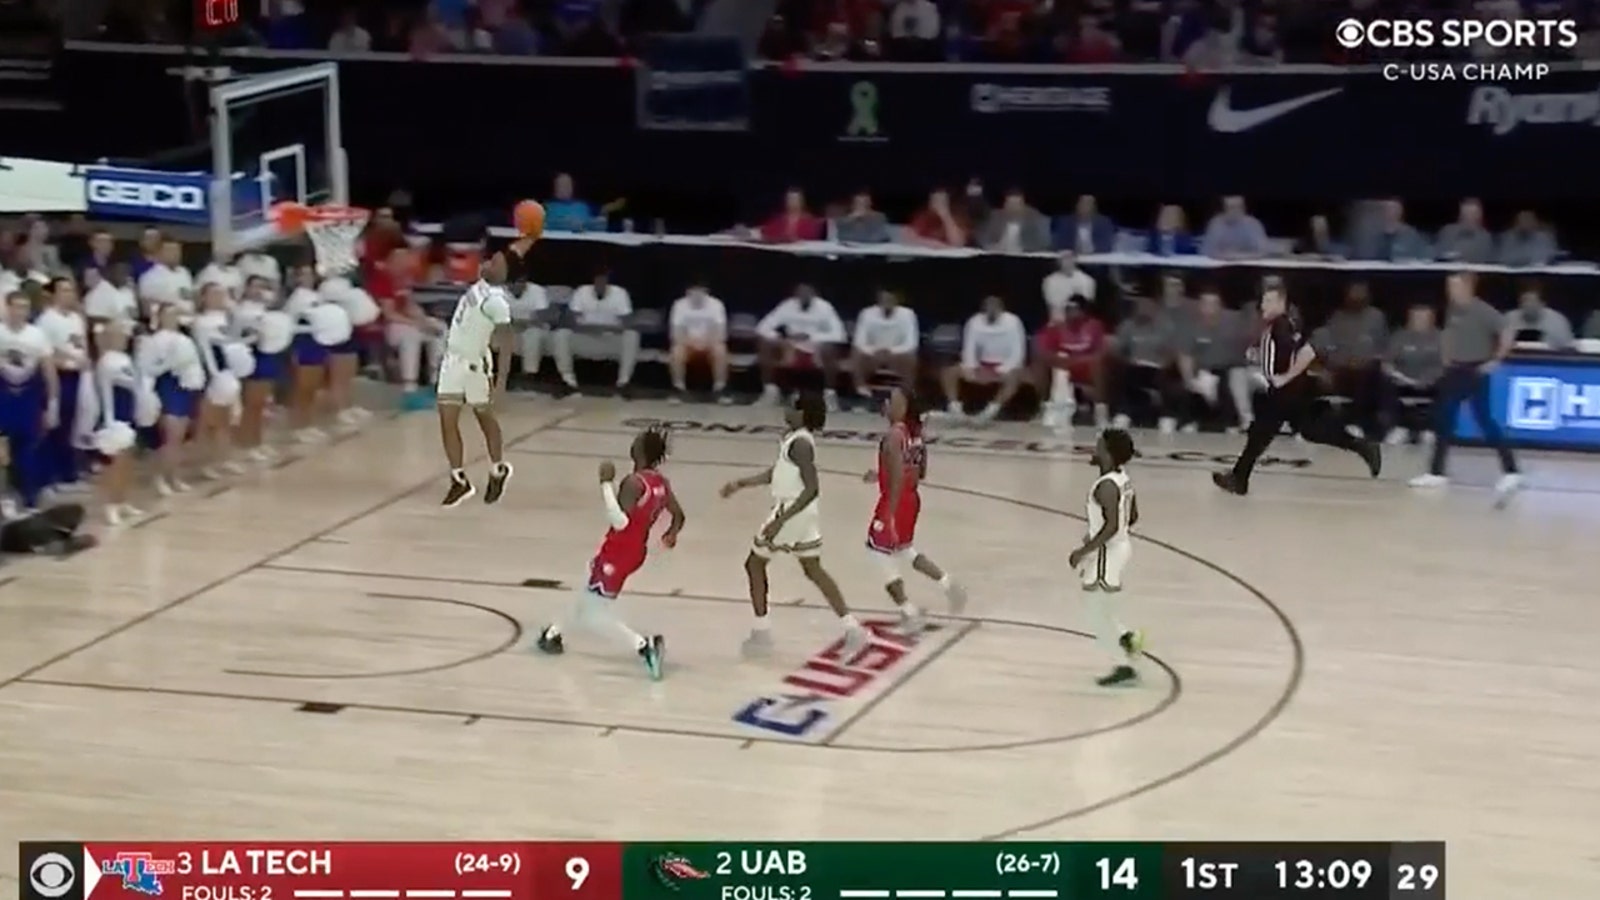 Tavin Lovan throws down the monster one-handed jam to extend UAB's lead